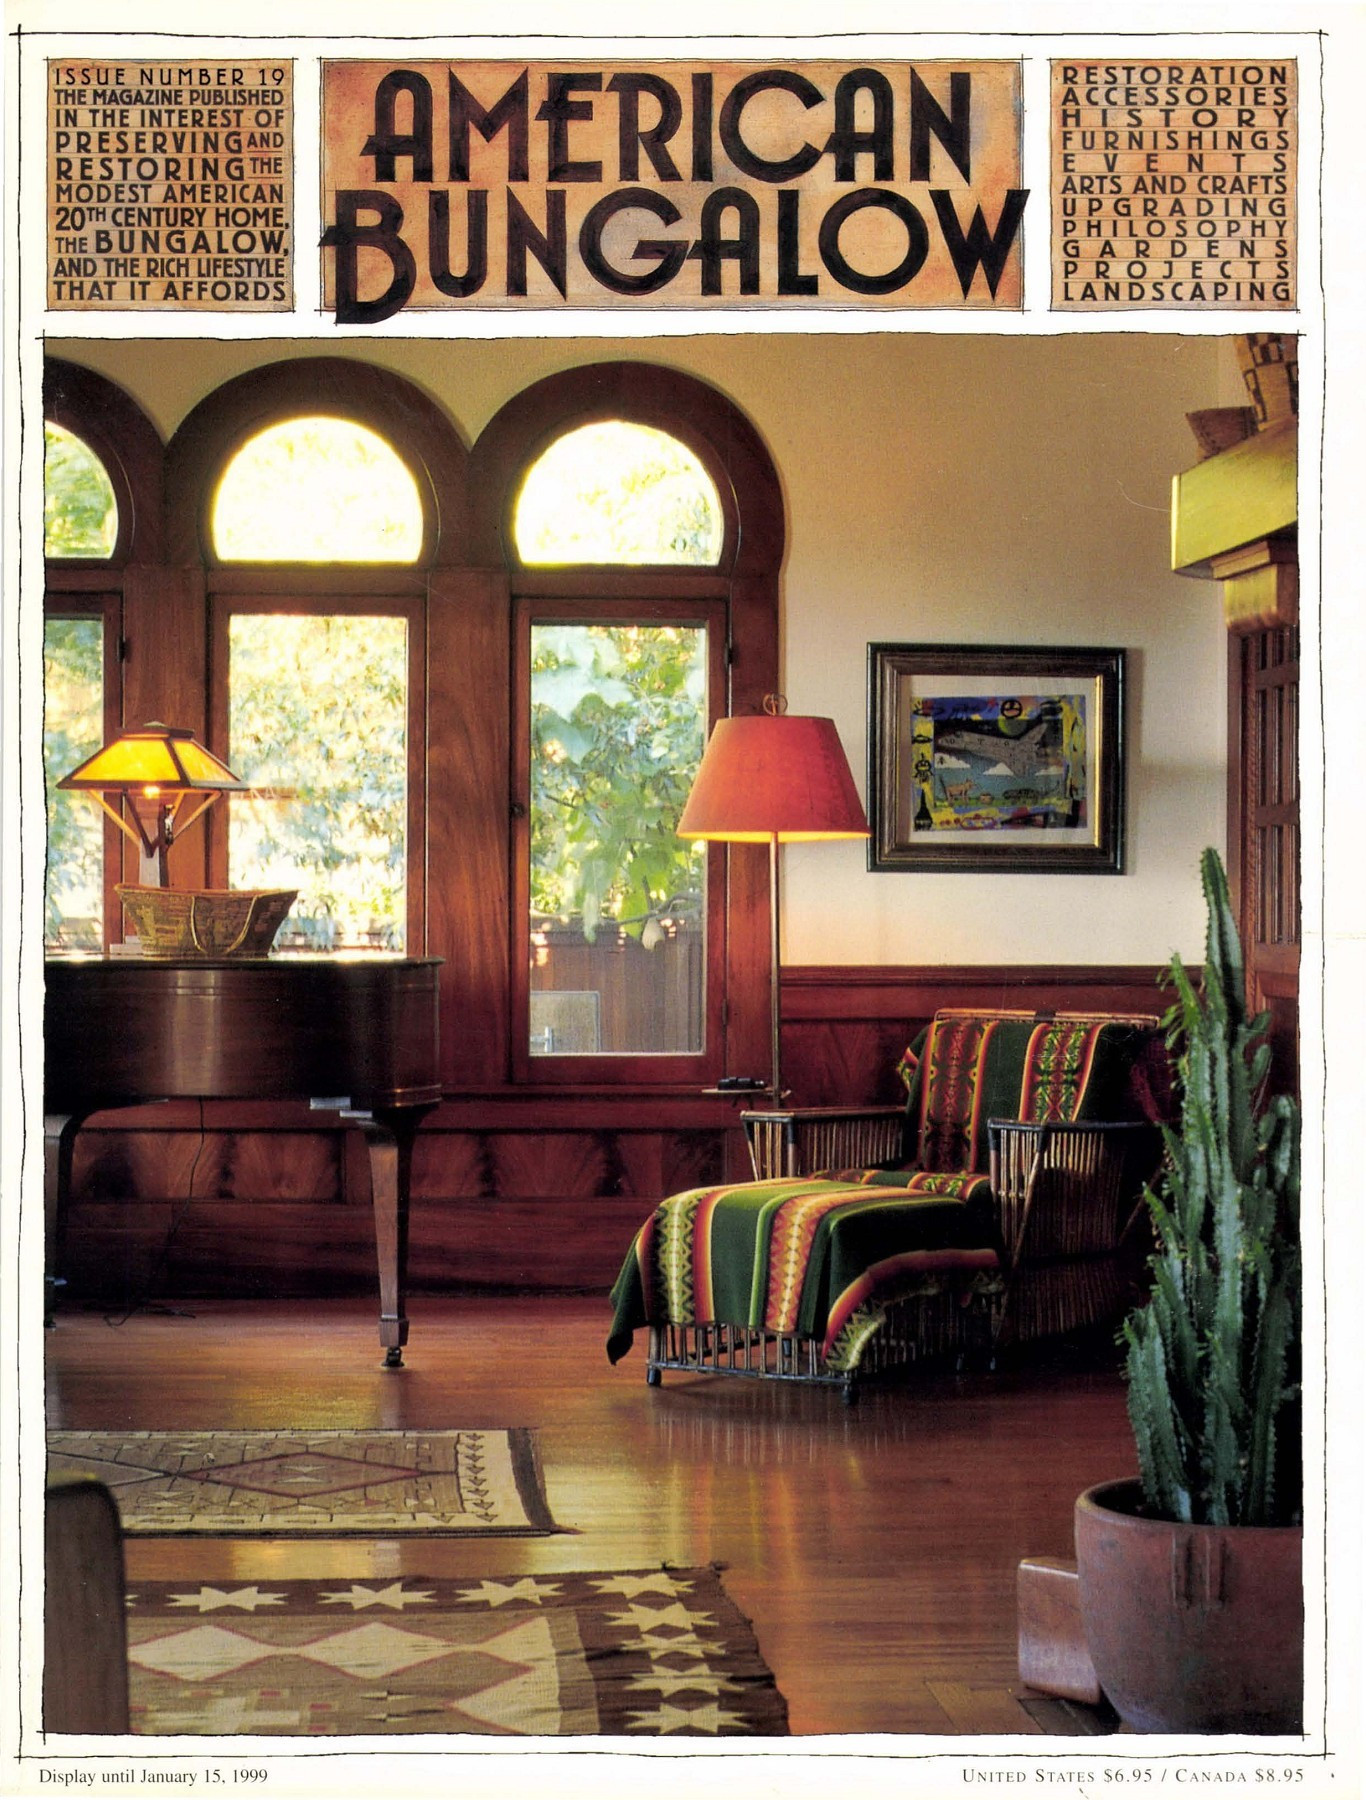 11 Nice asheville Hardwood Flooring Company 2024 free download asheville hardwood flooring company of american bungalow issue 19 sample pages 1 20 text version for american bungalow issue 19 sample pages 1 20 text version fliphtml5